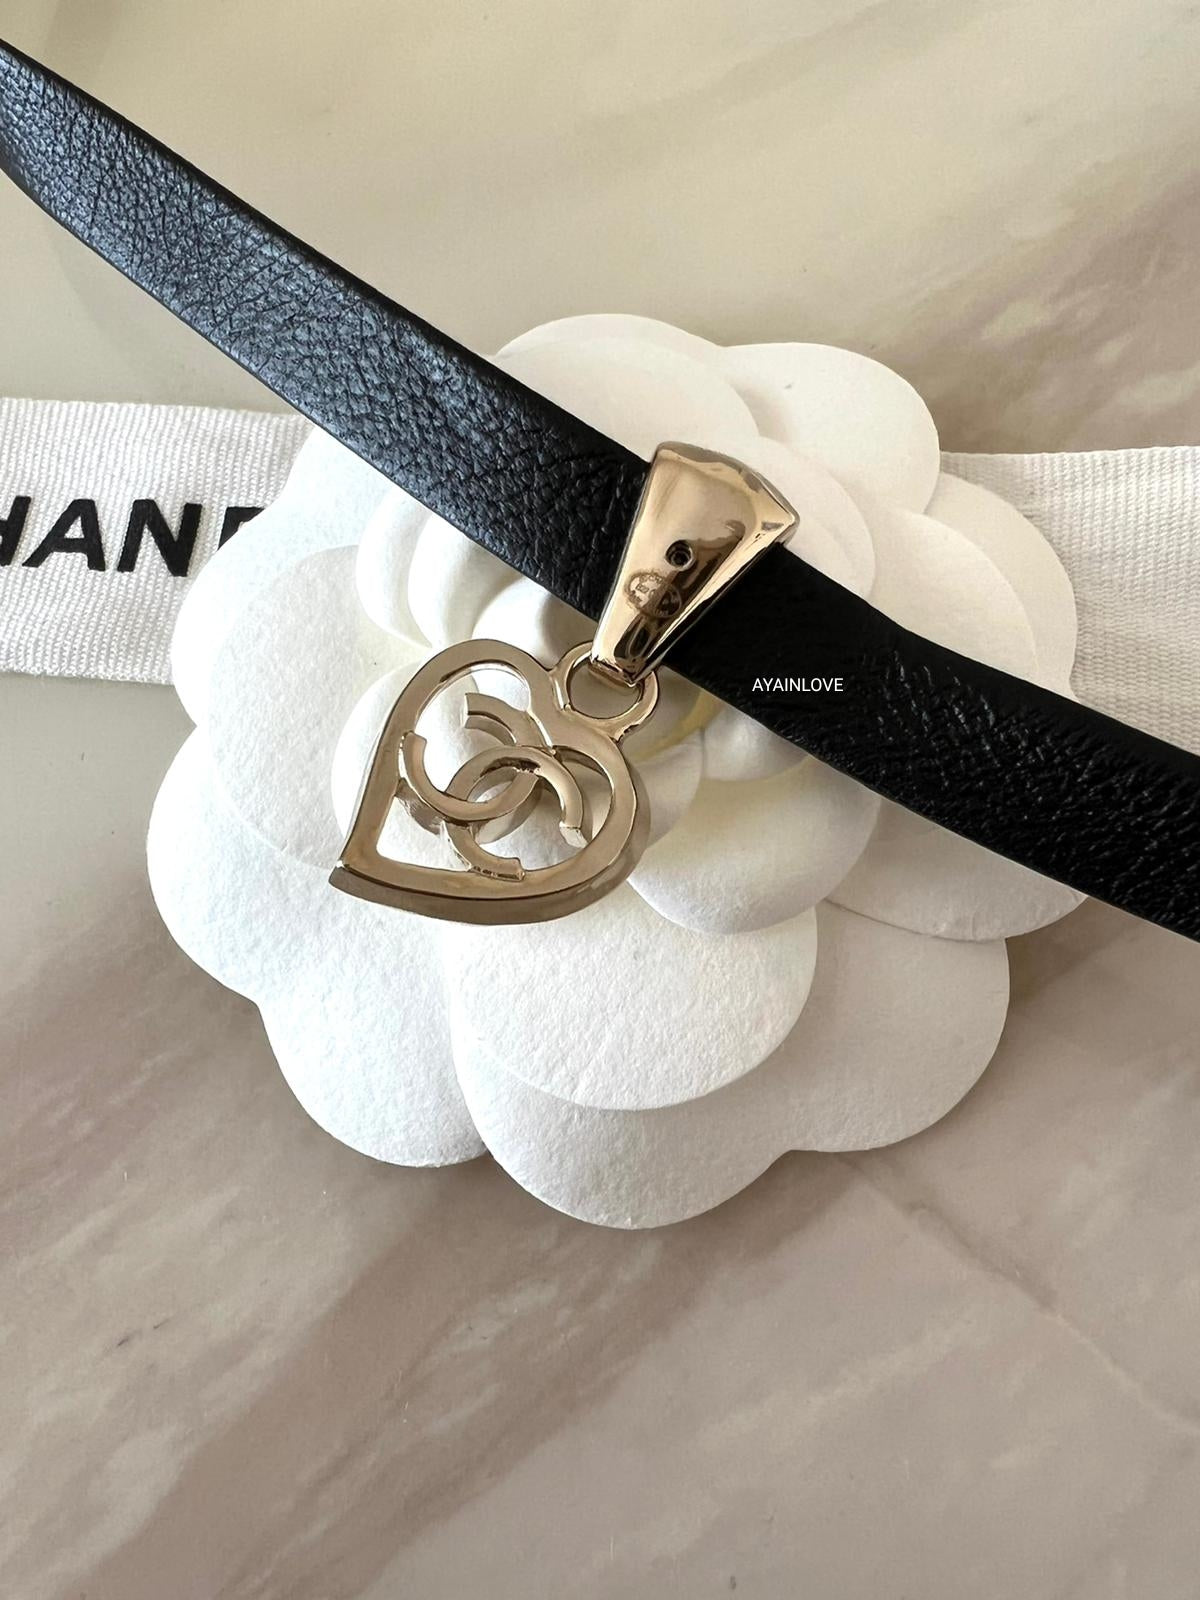 CHANEL 22P Heart Black Leather Choker Necklace Light Gold Hardware